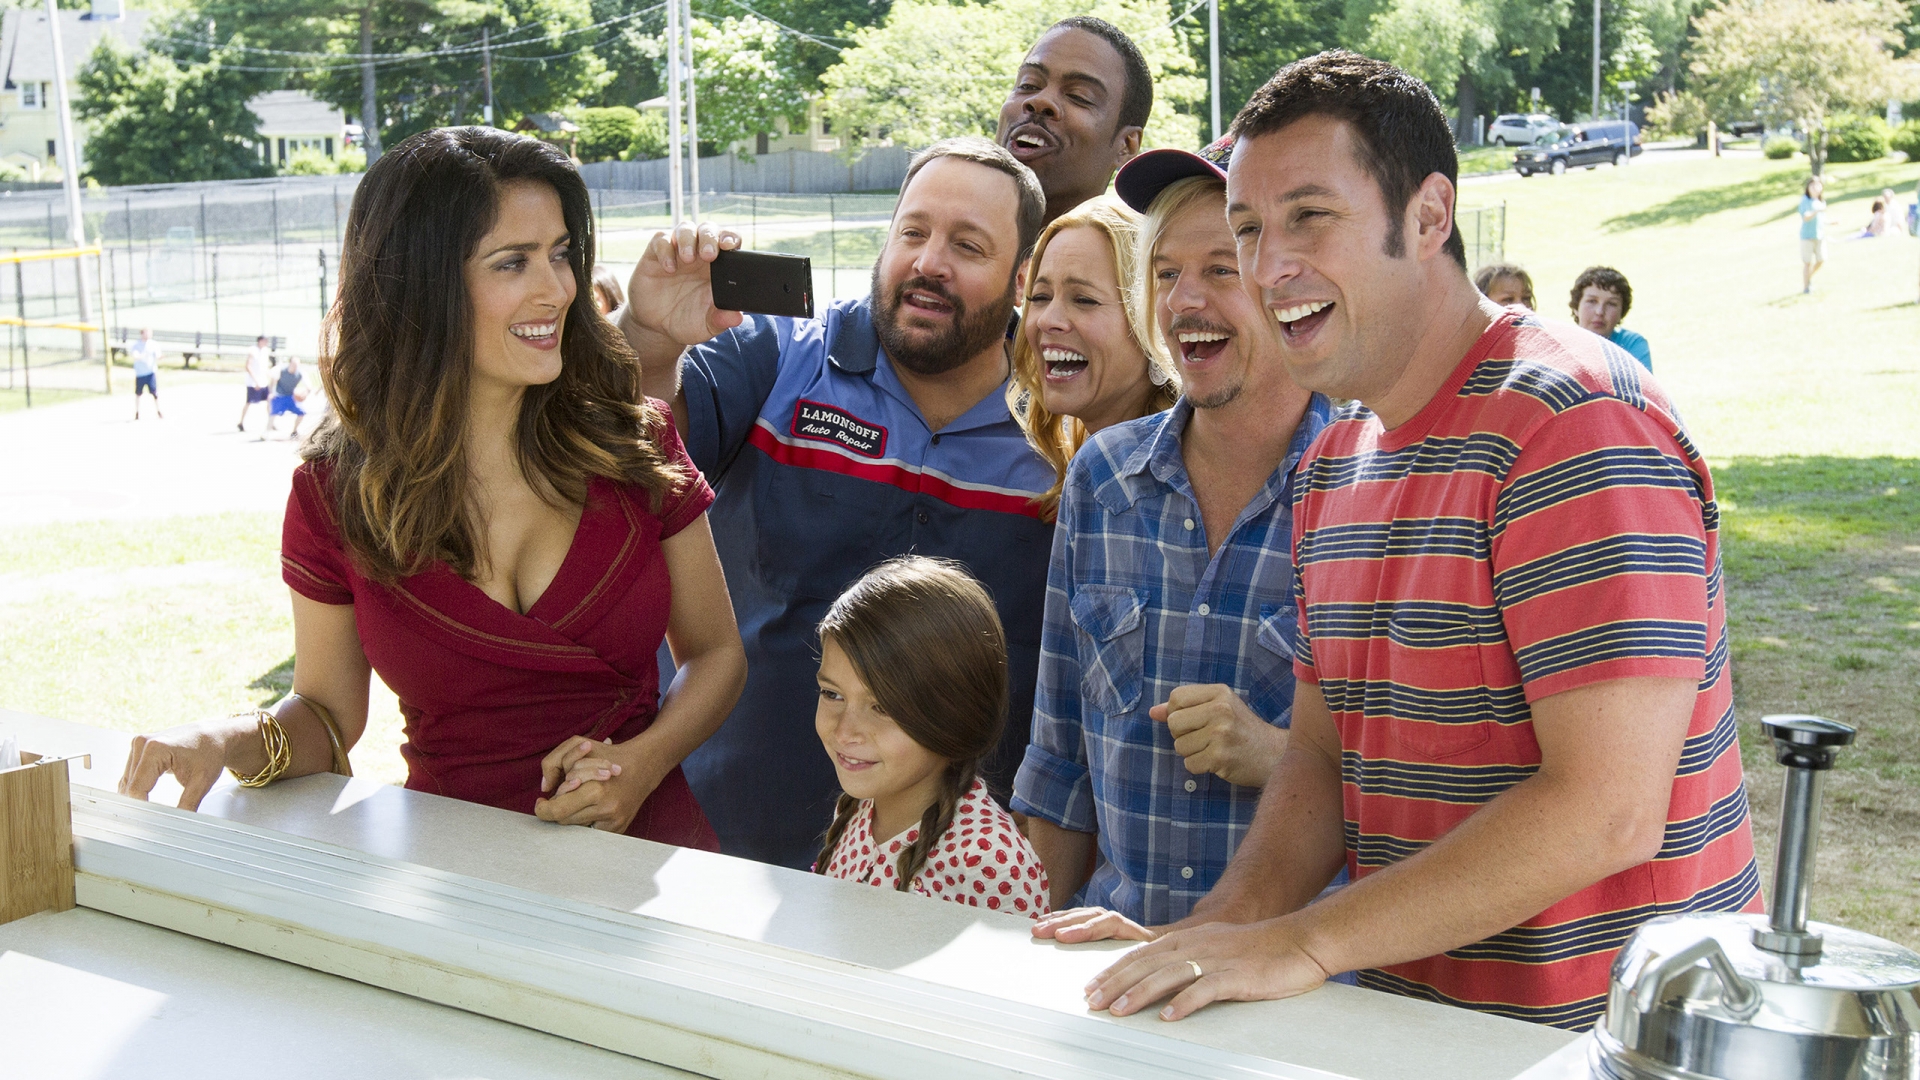 2013 Grown Ups 2 for 1920 x 1080 HDTV 1080p resolution